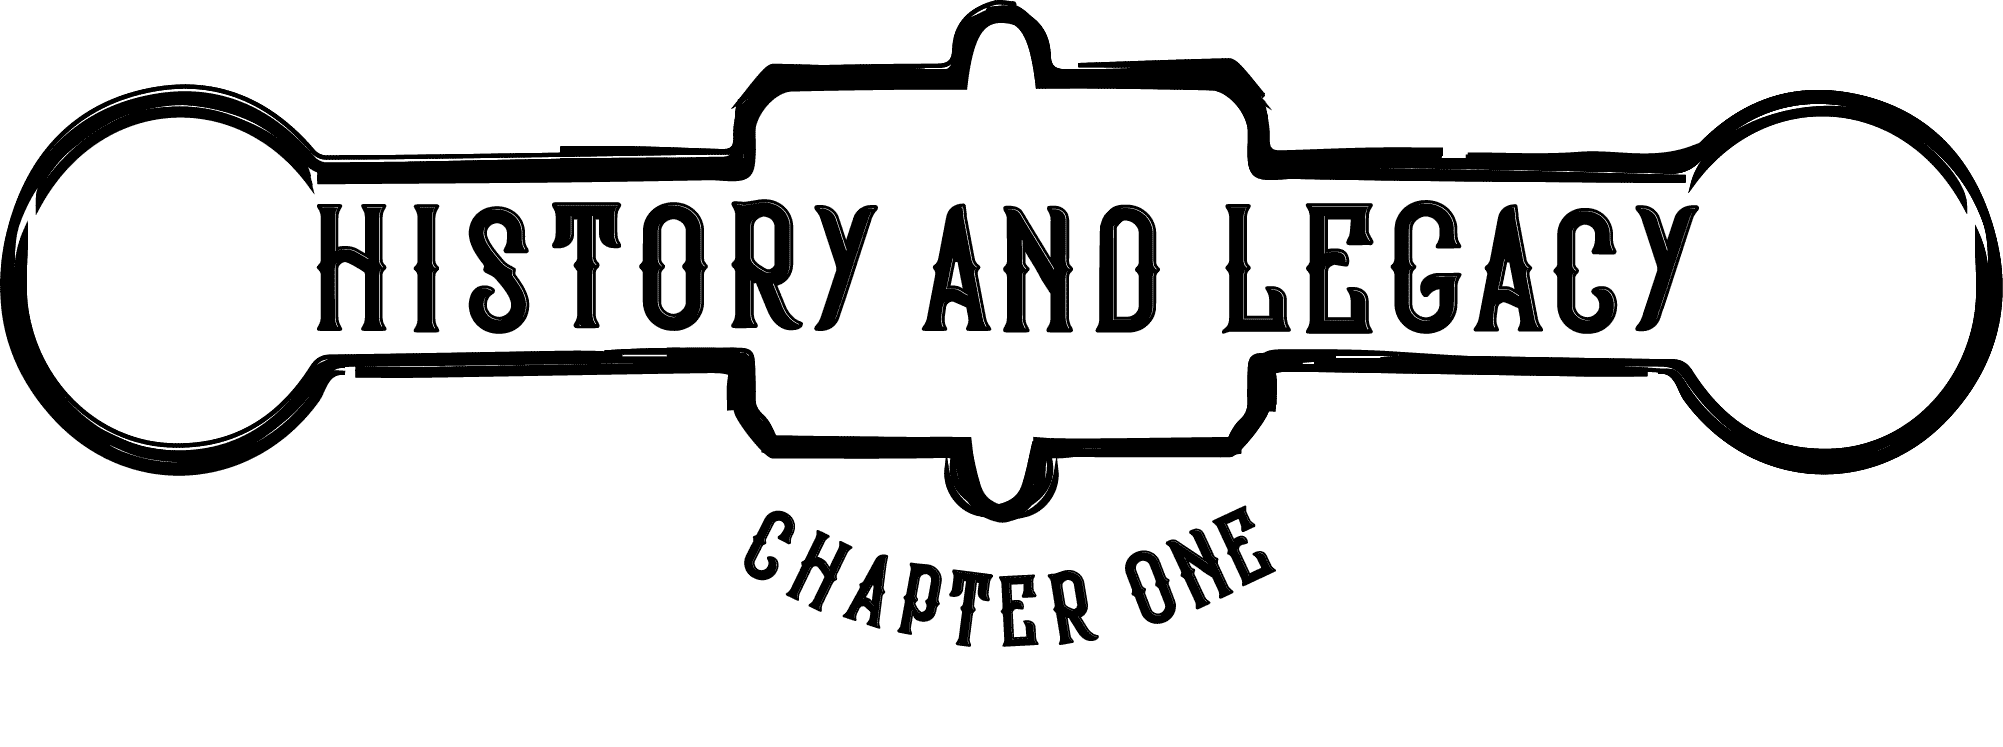 chapter_one_header